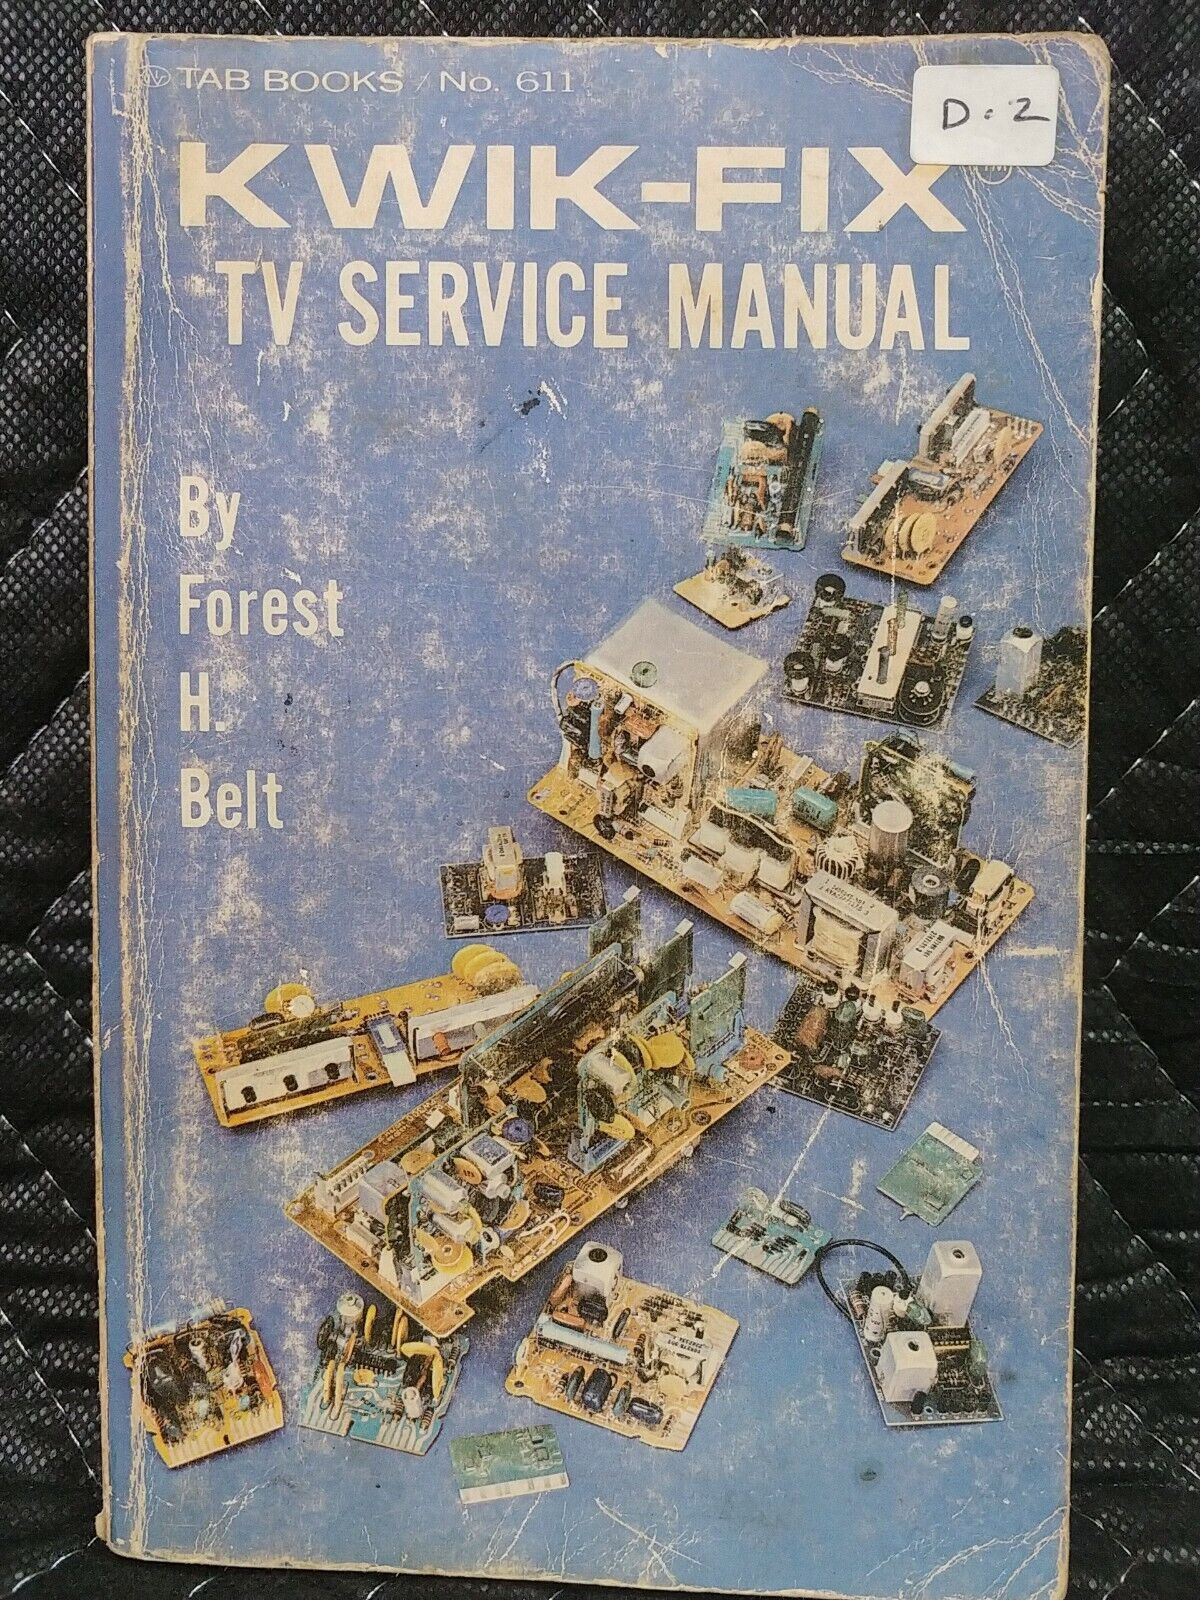 1972 Vintage Kwik-Fix TV Service Manual by Forest H. Belt First Edition